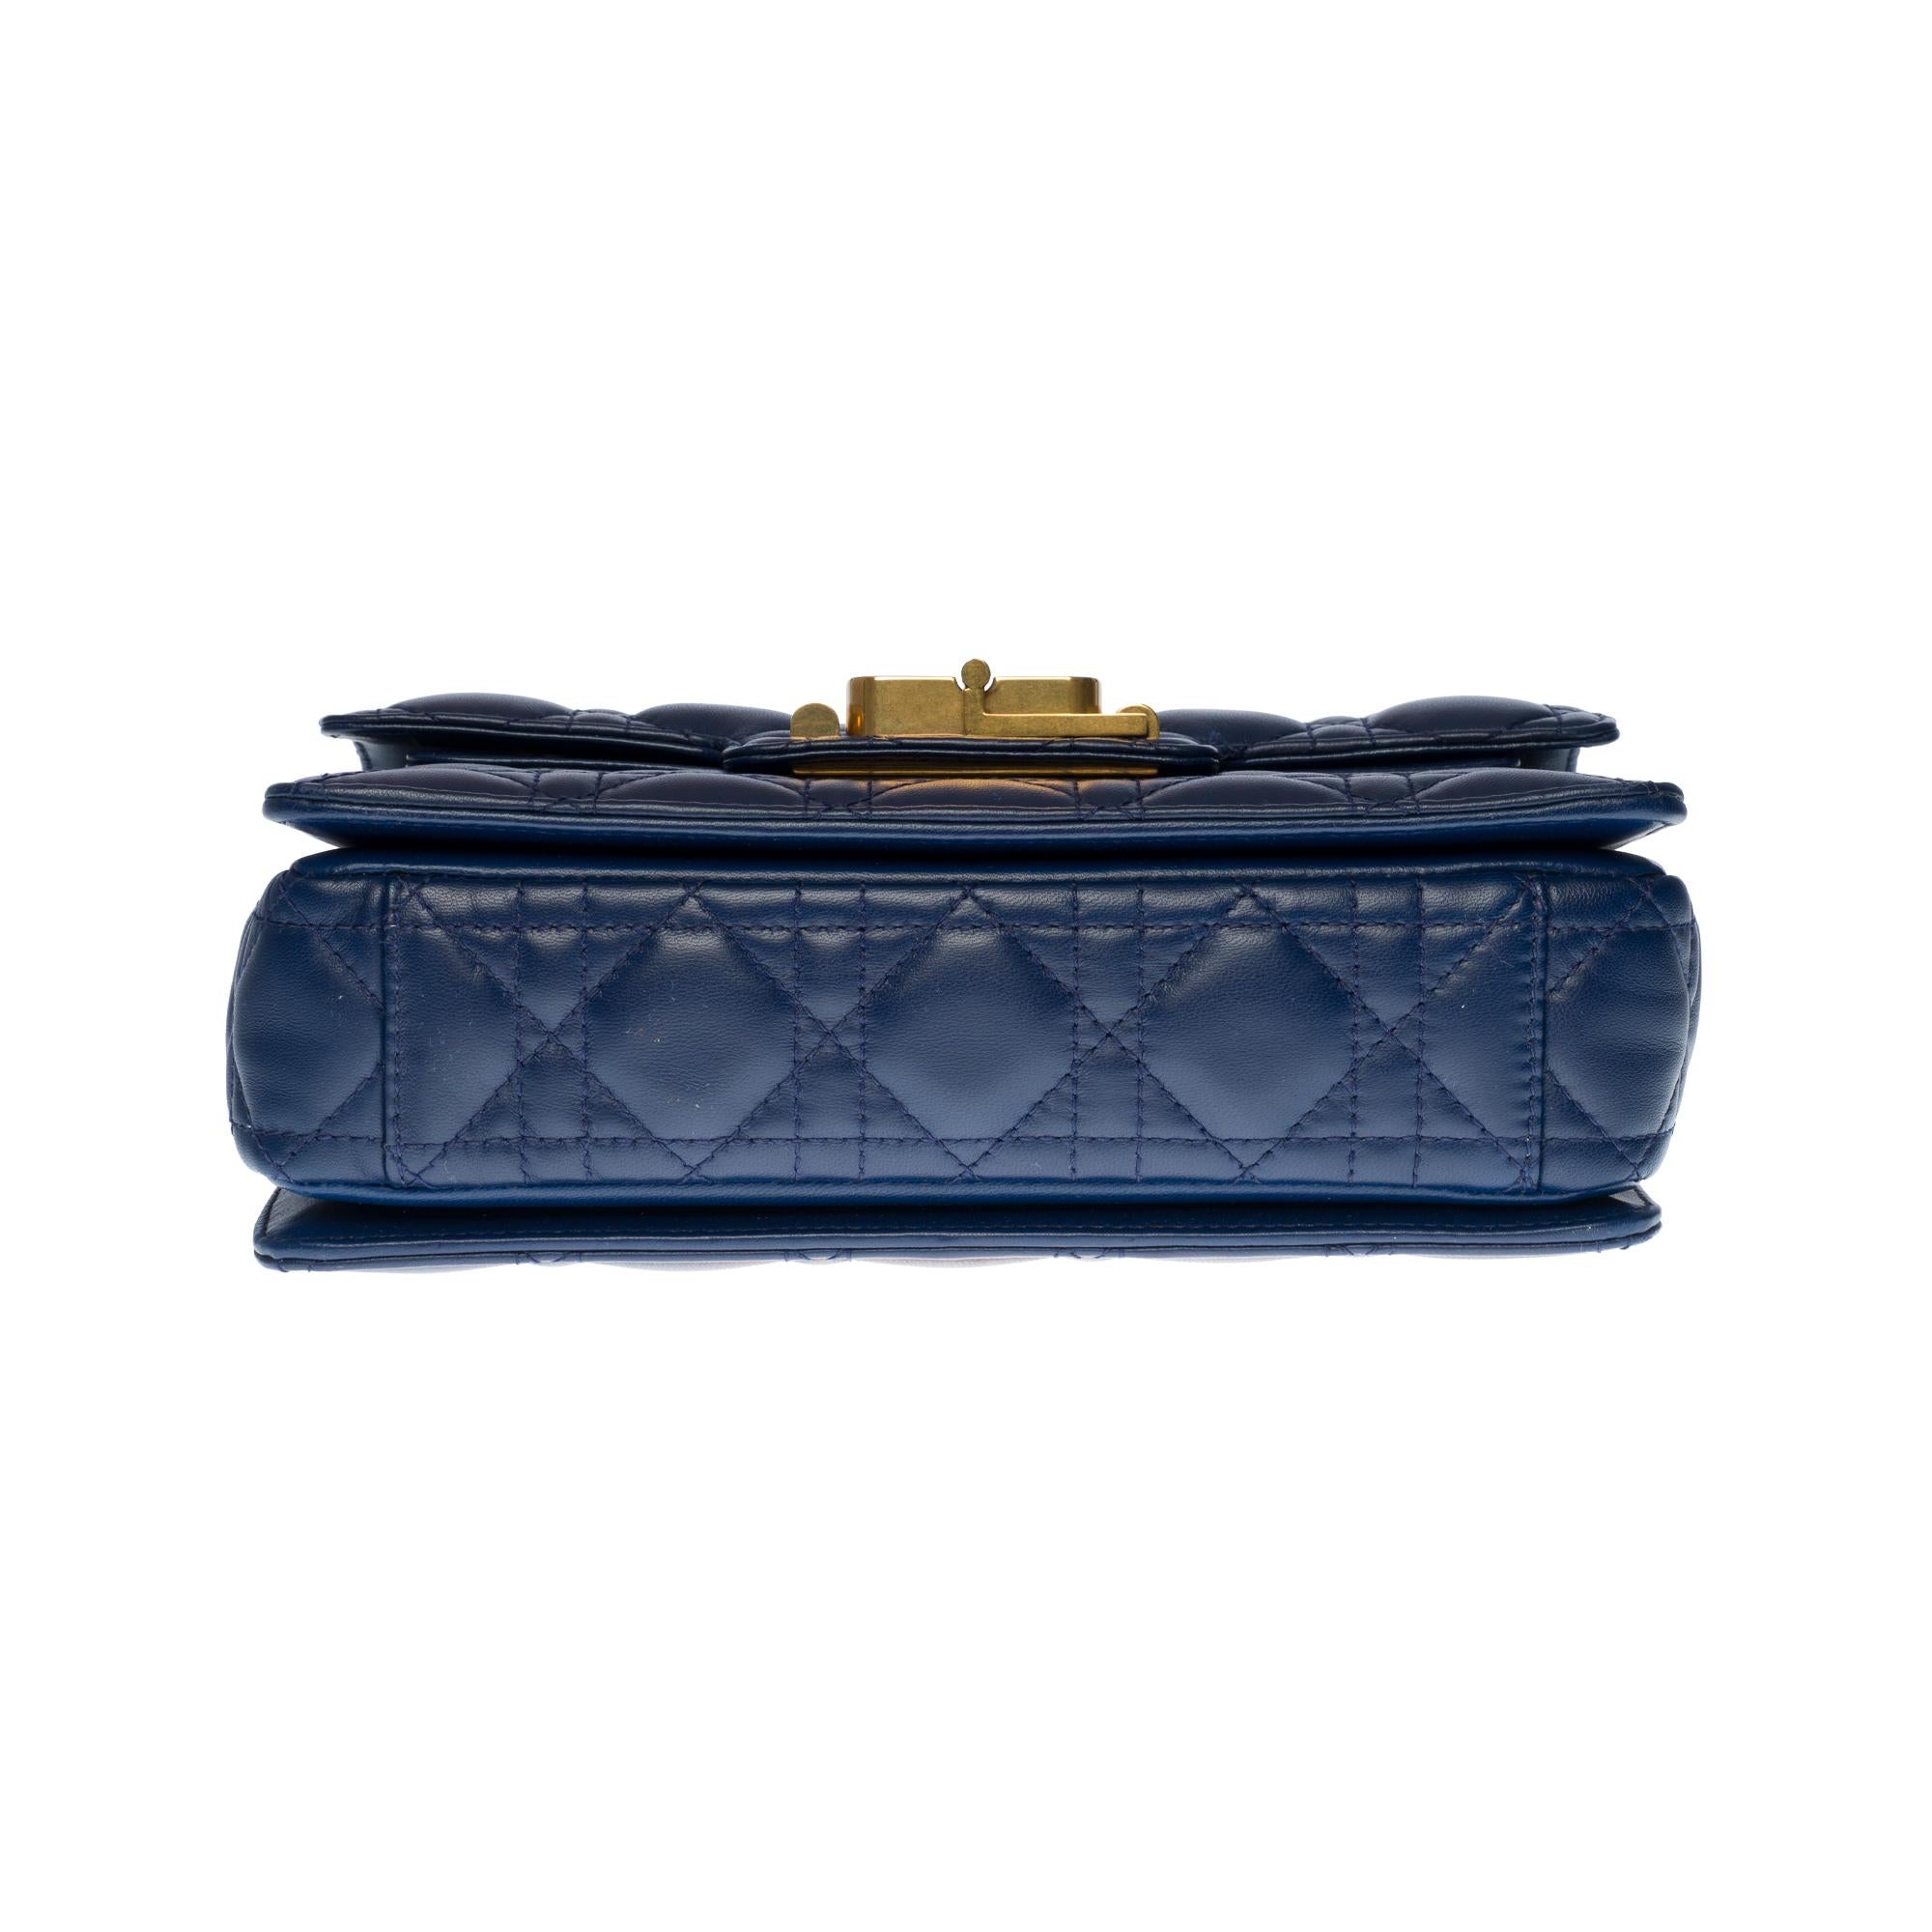 Women's New /Christian Dior Miss Dior Shoulder bag in Navy Blue cannage leather, GHW